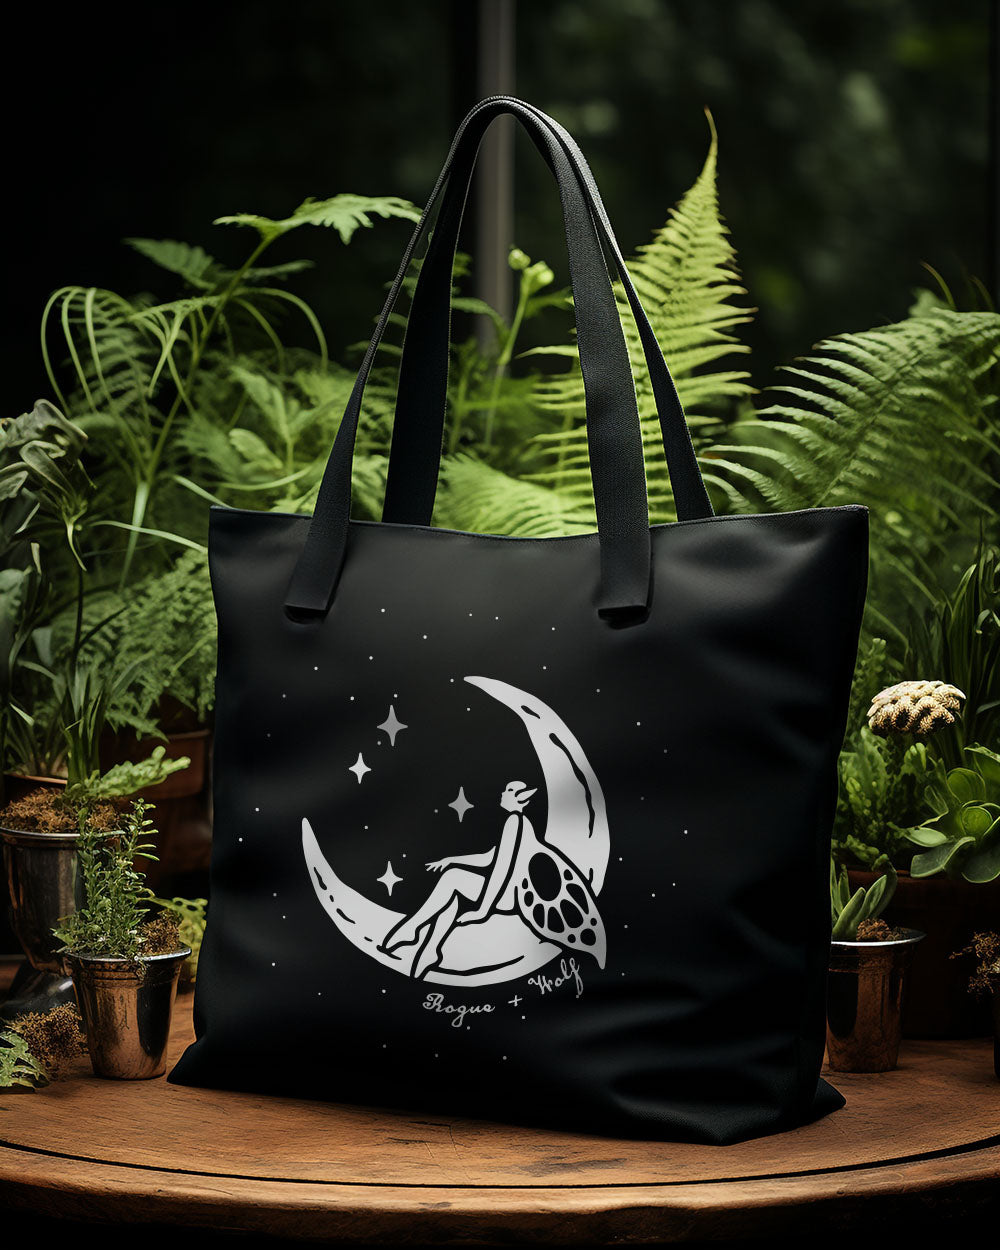 Pixie Moon Tote Bag -  Vegan Tote for Women Shopping & Grocery Cottagecore Dark Academia Witchy Style